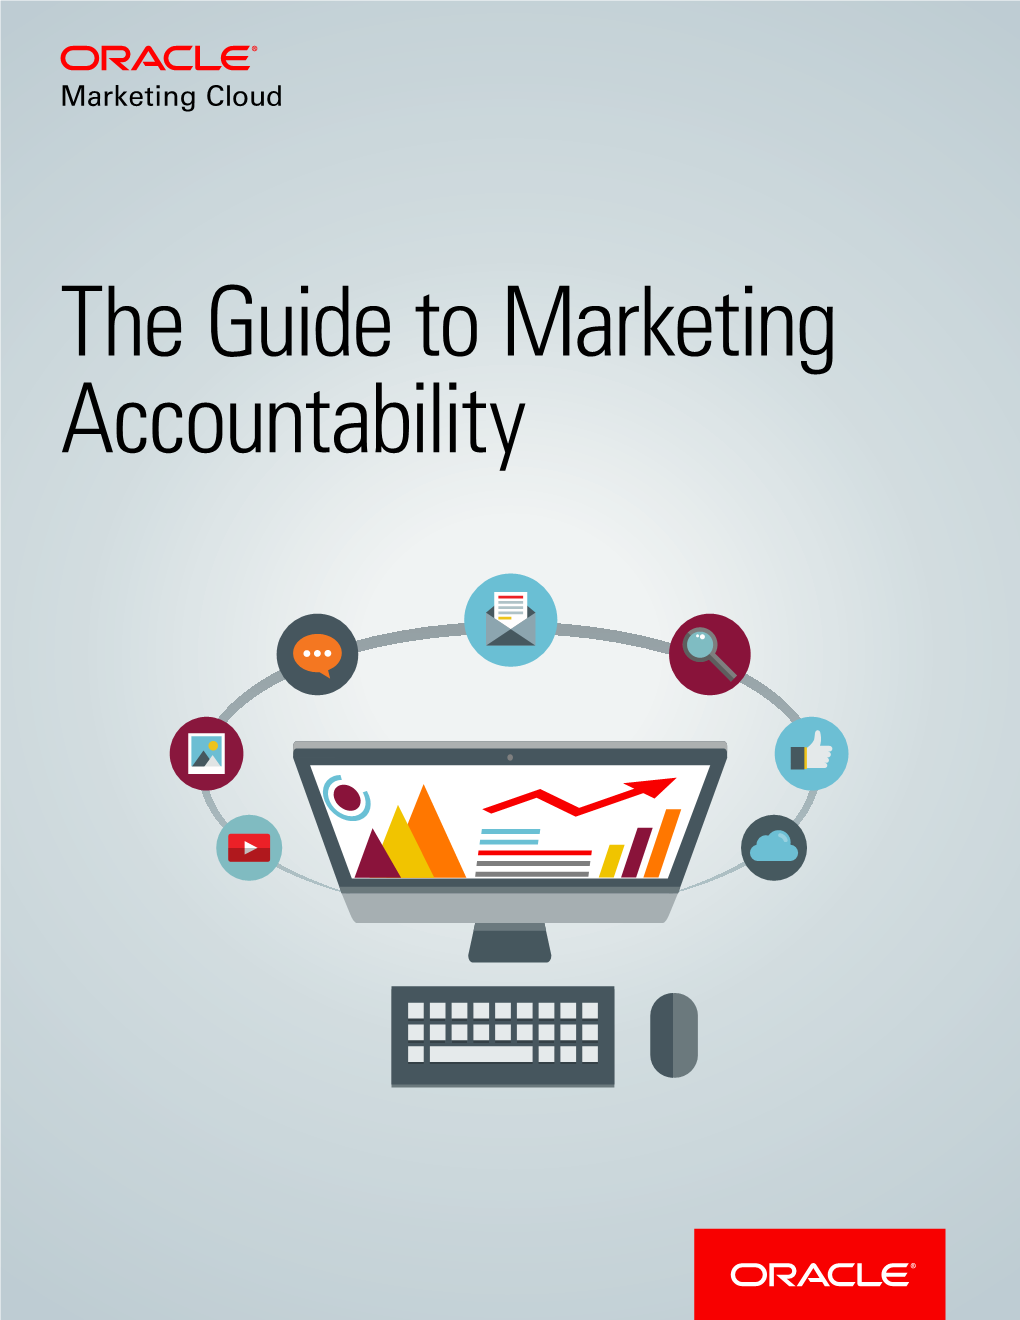 The Guide to Marketing Accountability the GUIDE to MARKETING ACCOUNTABILITY